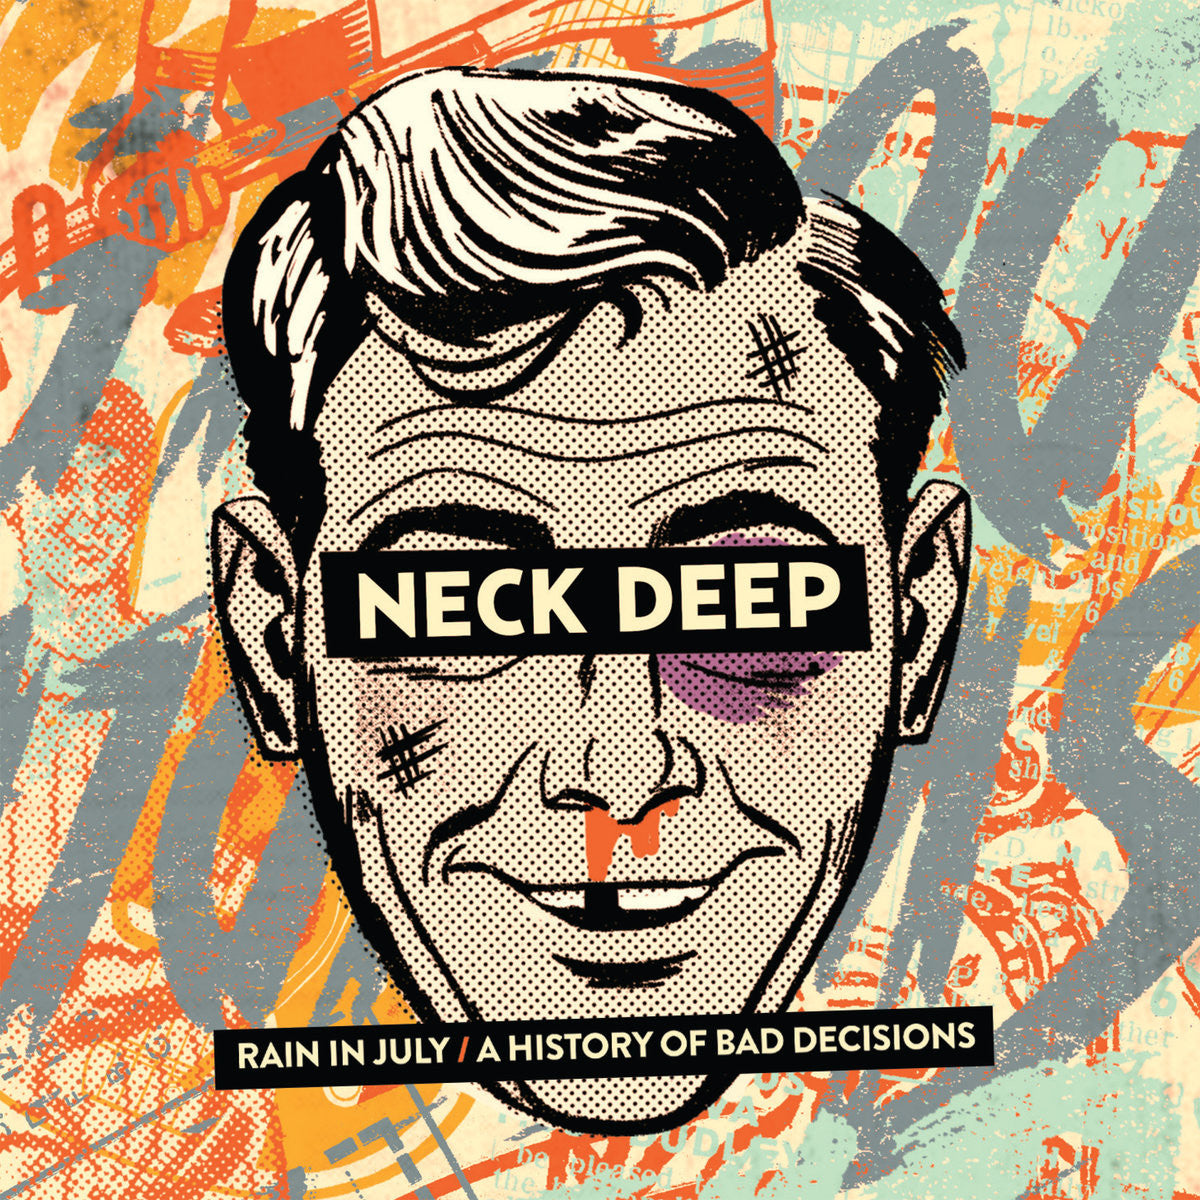 Neck Deep - Rain In July / A History Of Bad Decisions